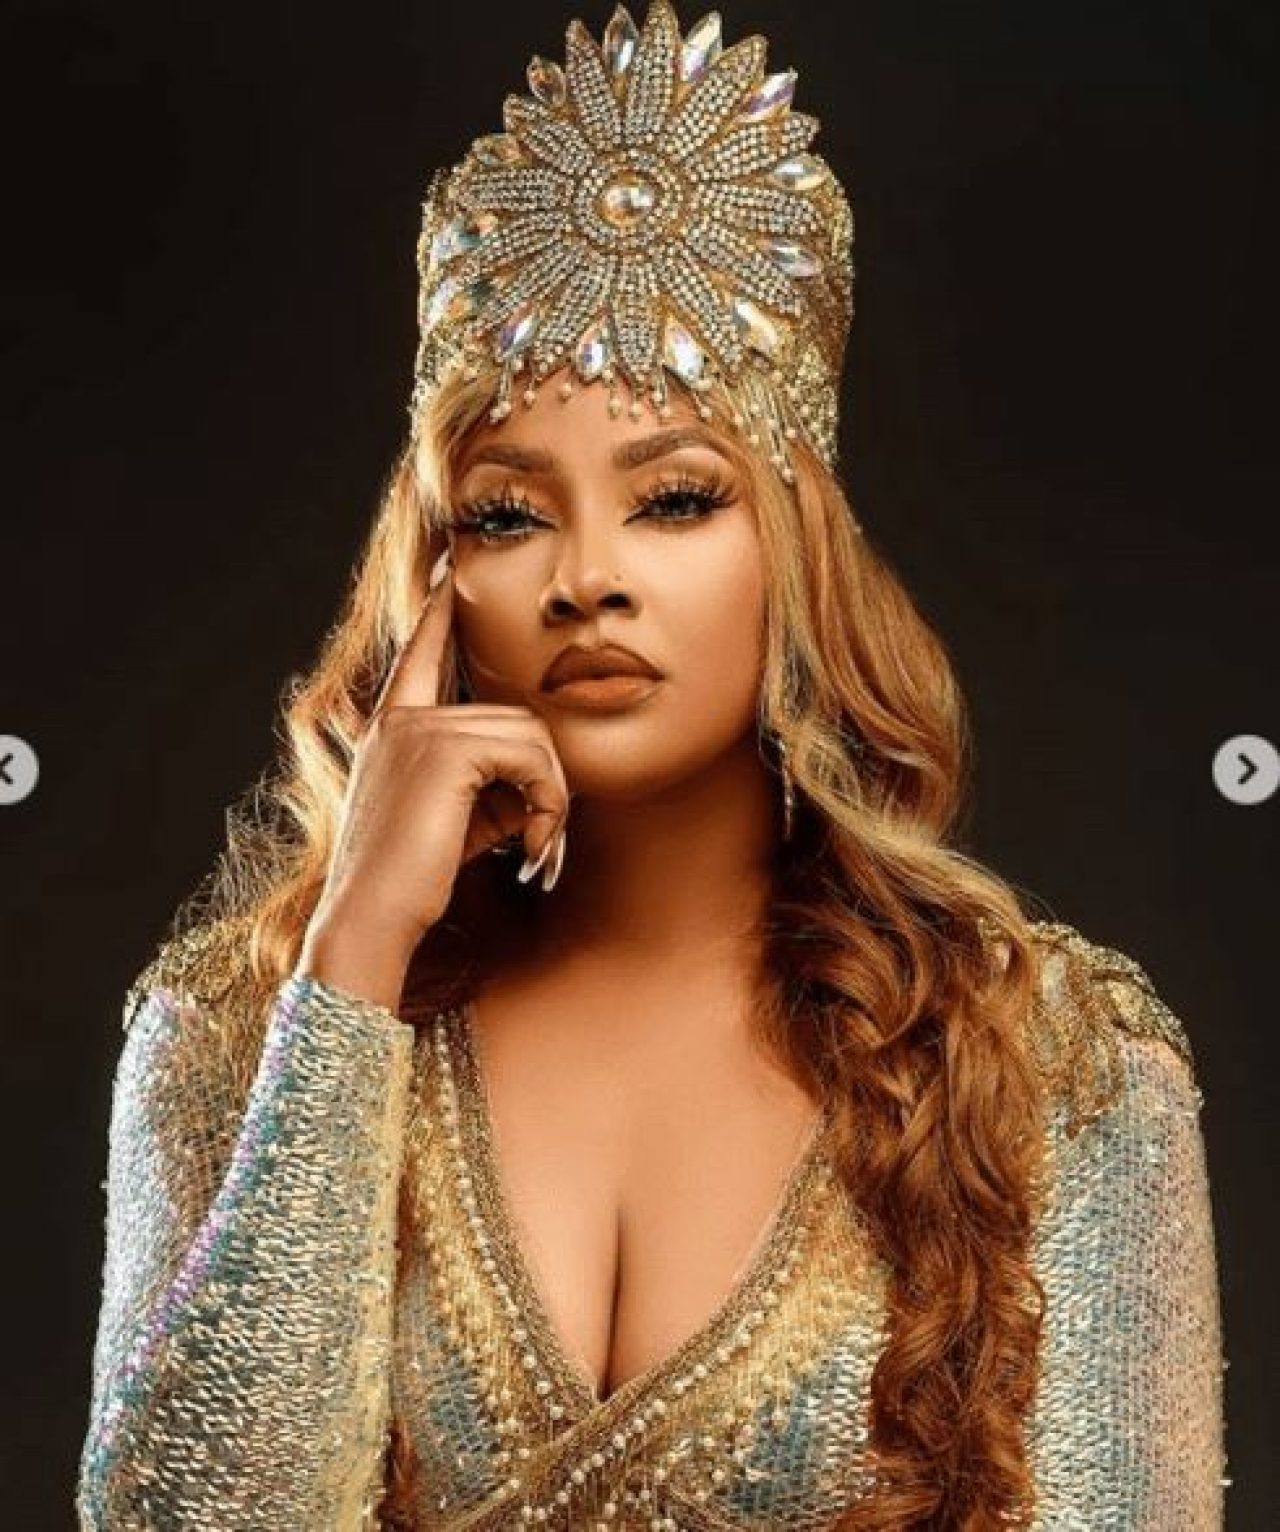 Anita And Uche Elendu Swallowed Lizard for Fame and Wealth”: Angela Okorie Resumes Dragging Her Ex-Besties with Receipts AdvertAfrica News on afronewswire.com: Amplifying Africa's Voice | afronewswire.com | Breaking News & Stories